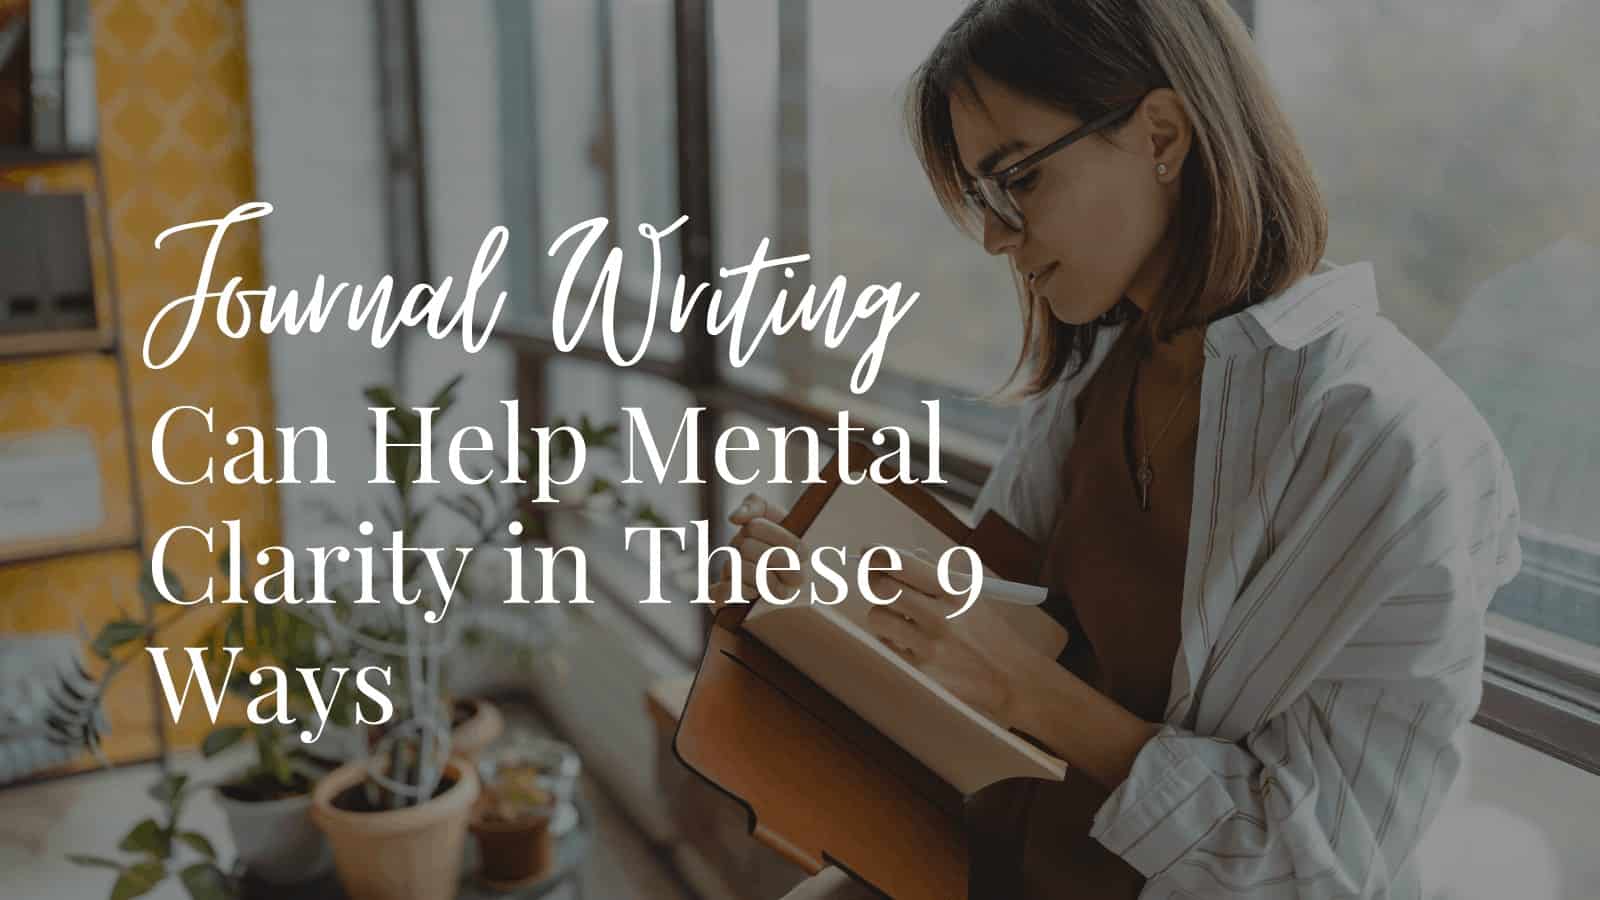 Journal Writing Can Help Mental Clarity in These 9 Ways